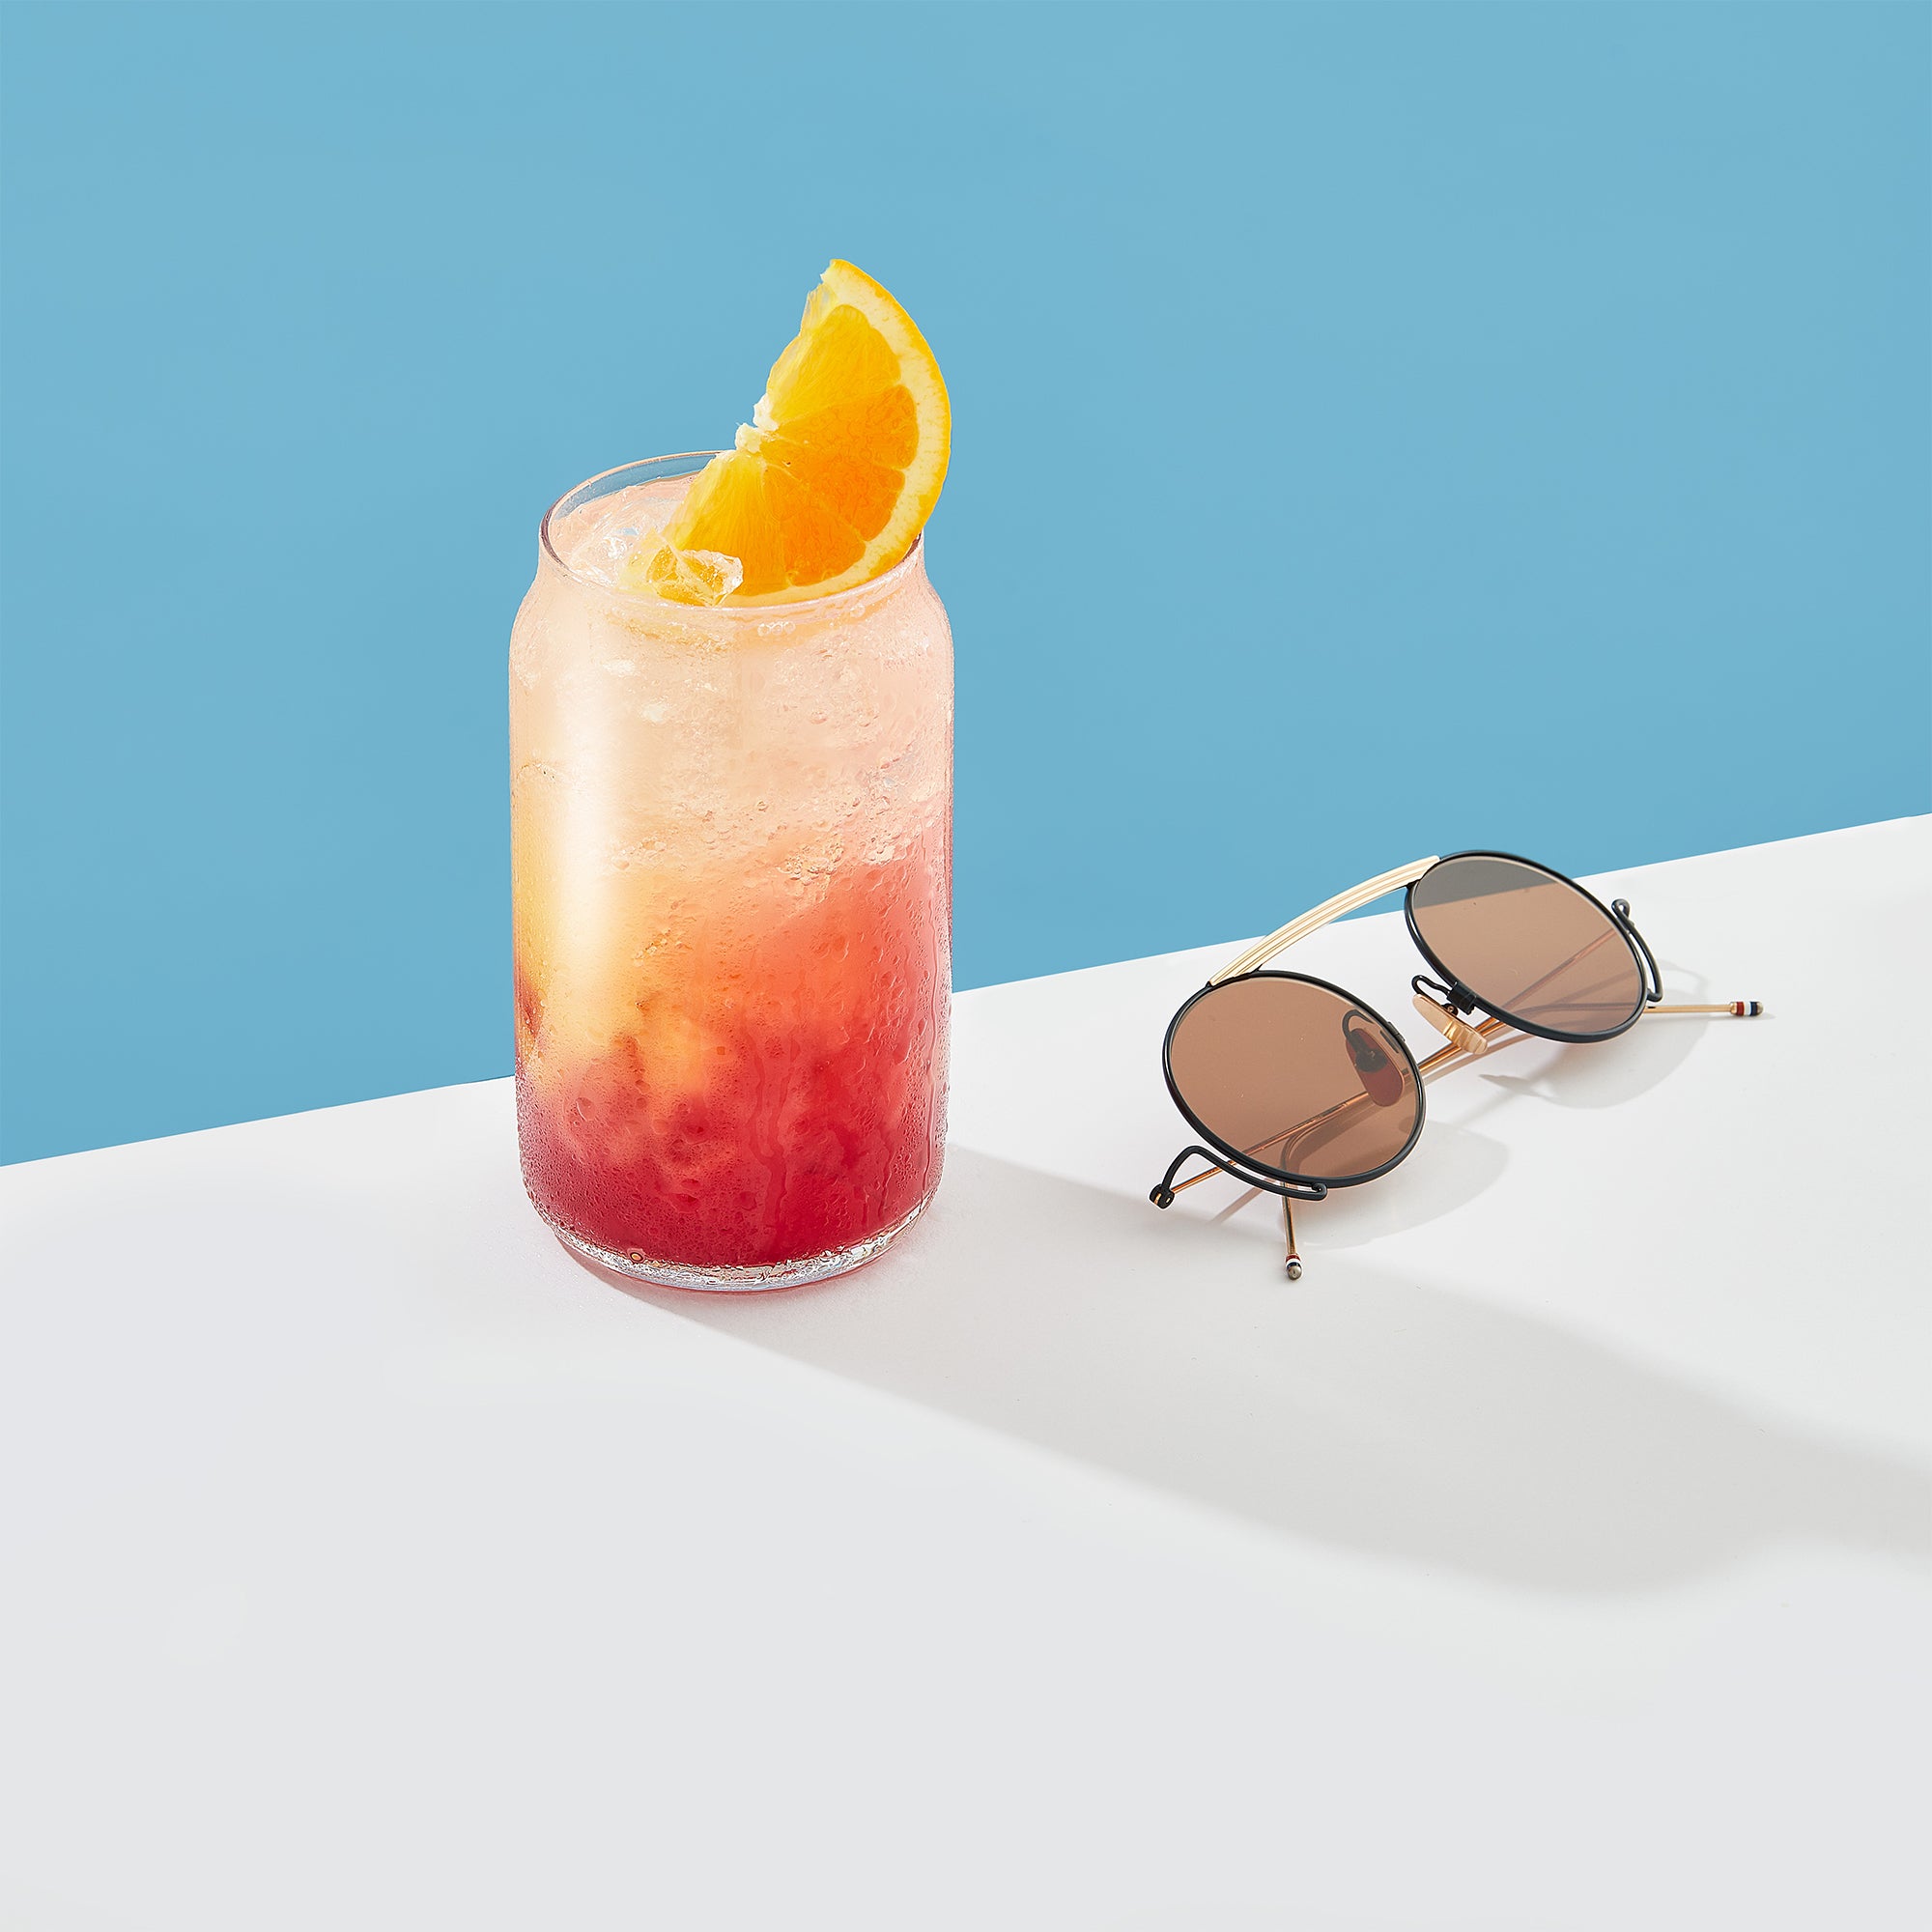 A glass of orange/strawberry juice and sunglasses on a table, next to Classic Can Shape Tumbler Drinking Glass Cups by JoyJolt.